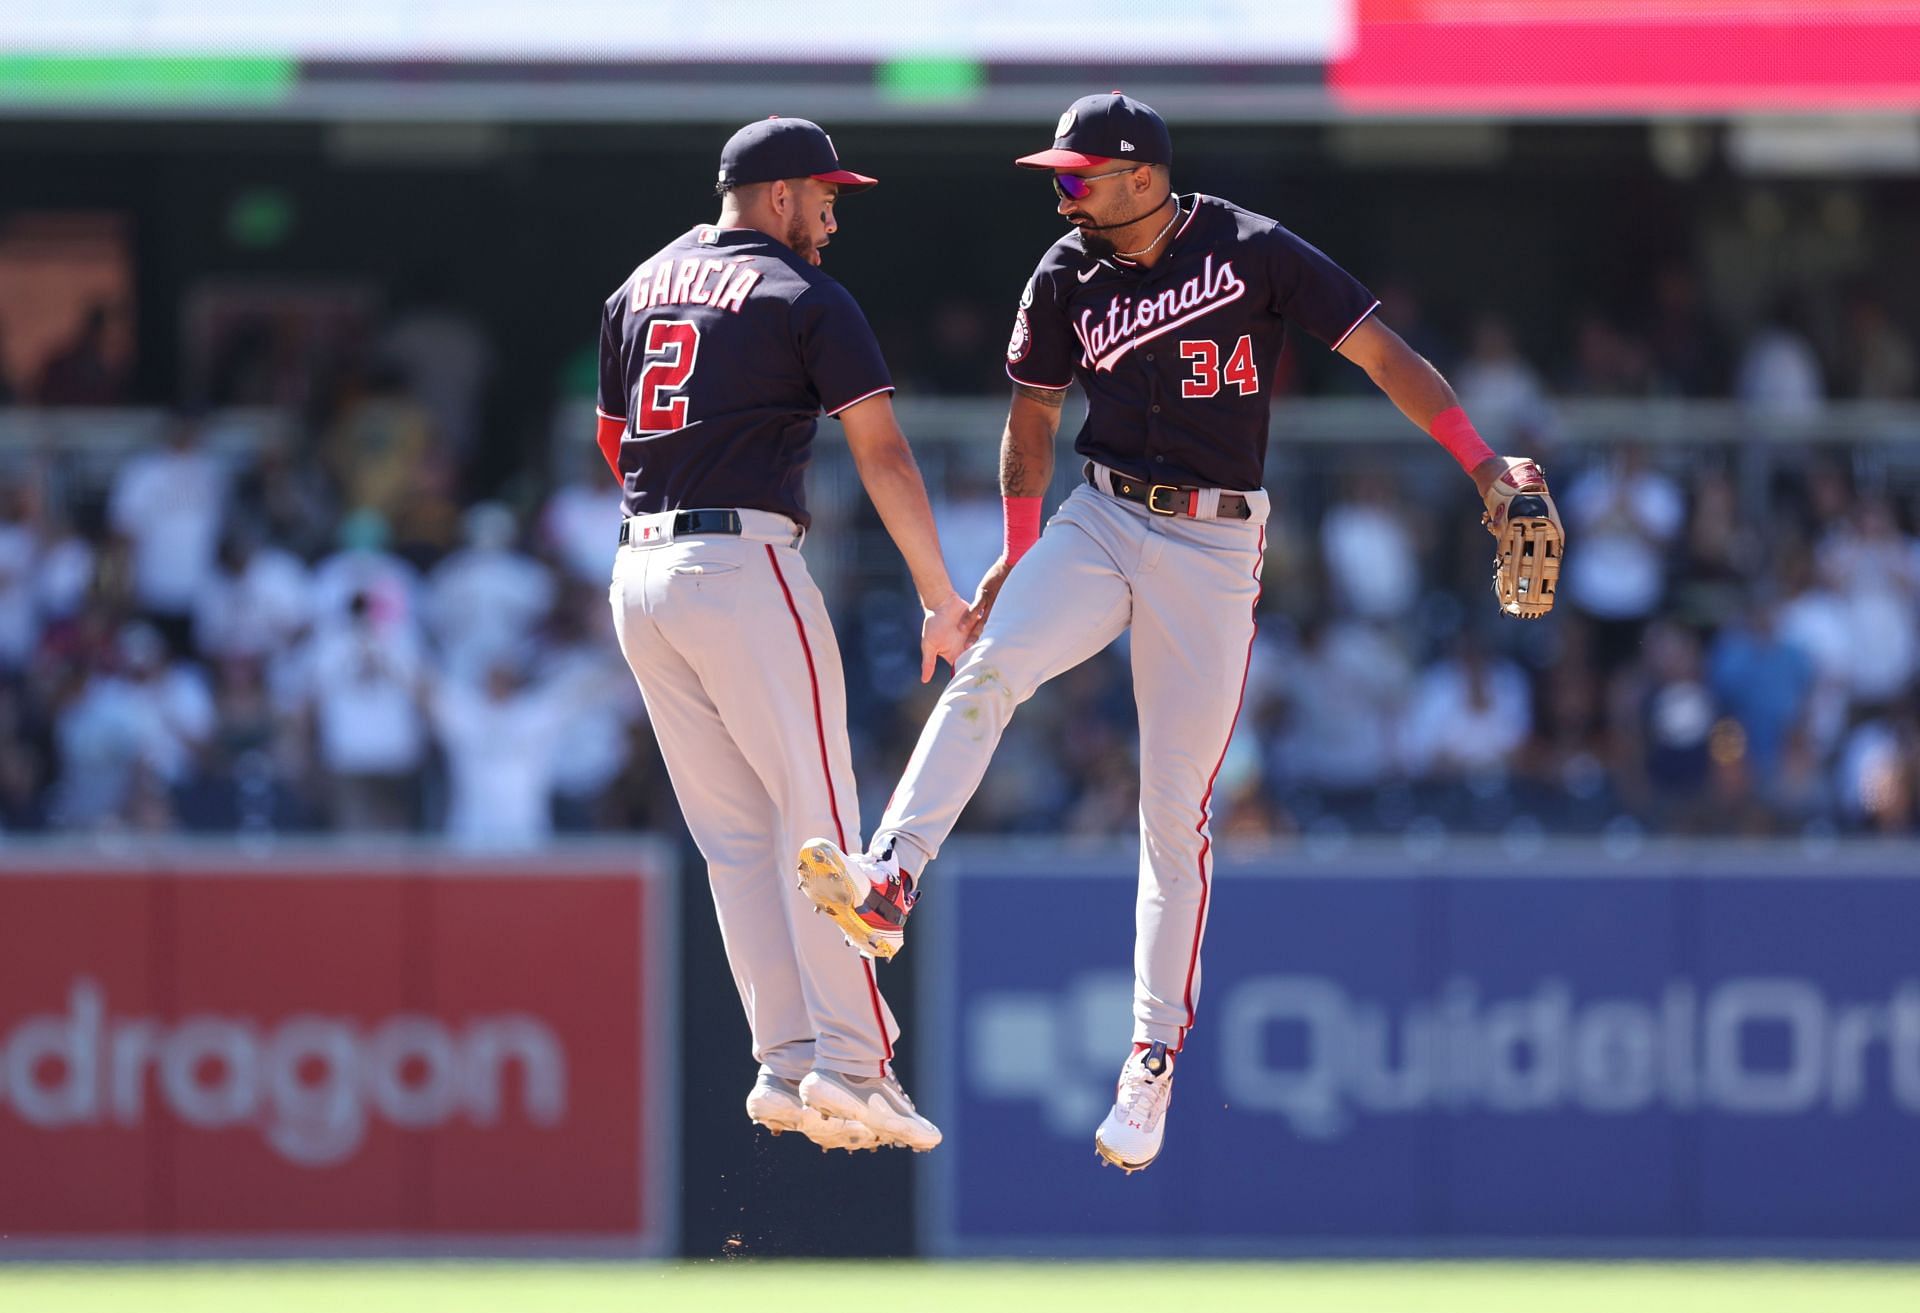 Luis Garcia of the Washington Nationals celebrates with Derek Hill after defeating the San Diego Padres 8-3 at PETCO Park on Sunday.